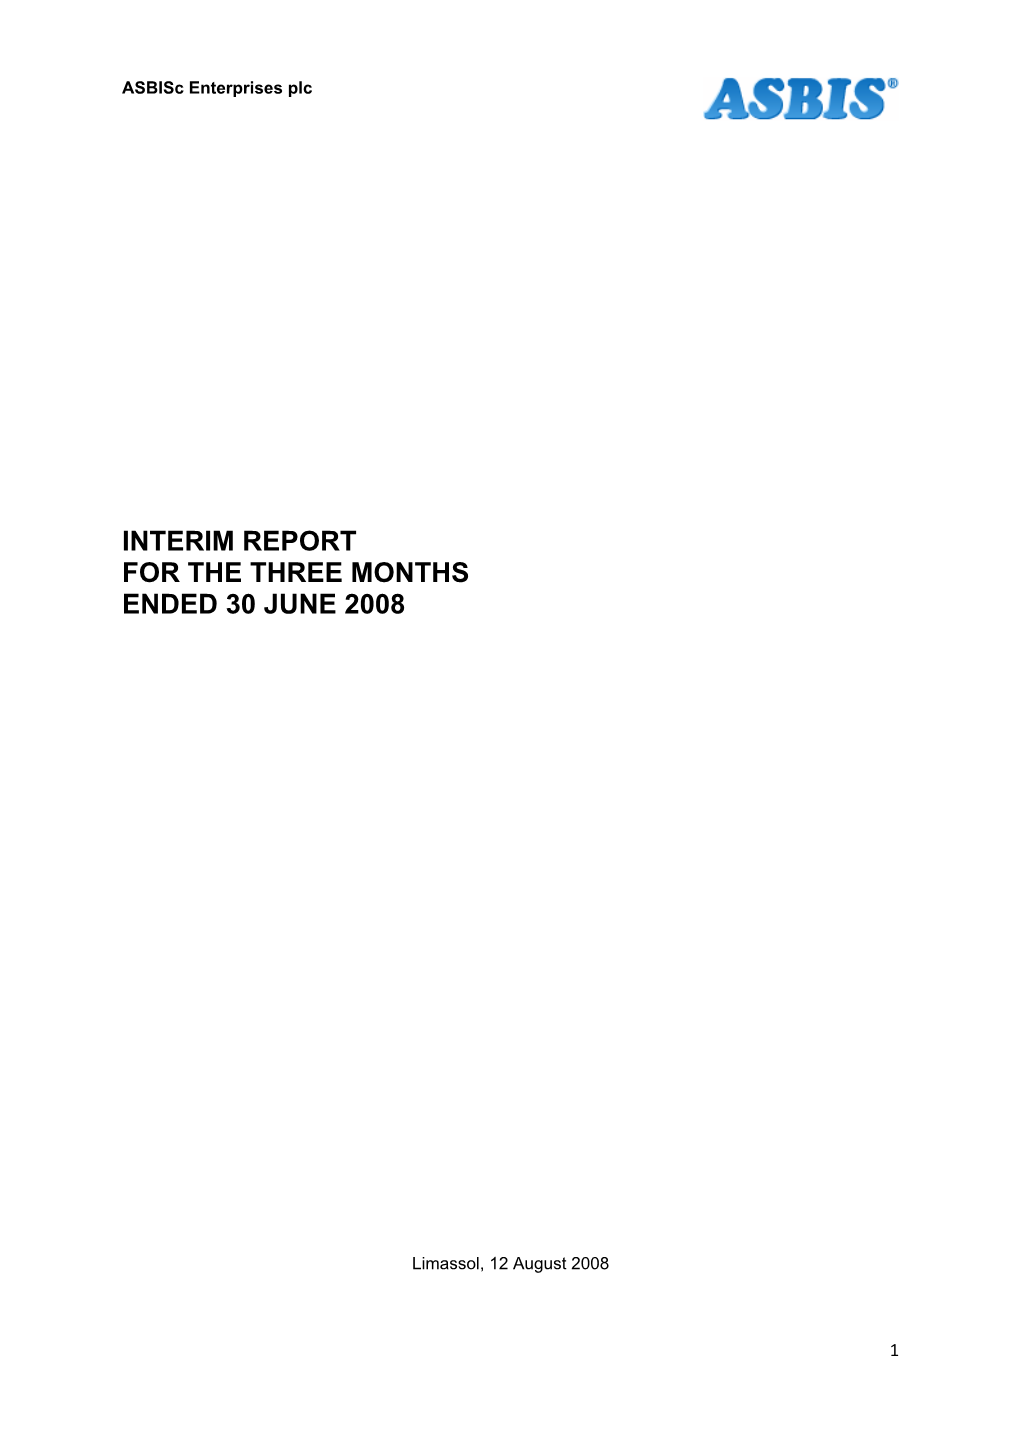 Interim Report for the Three Months Ended 30 June 2008